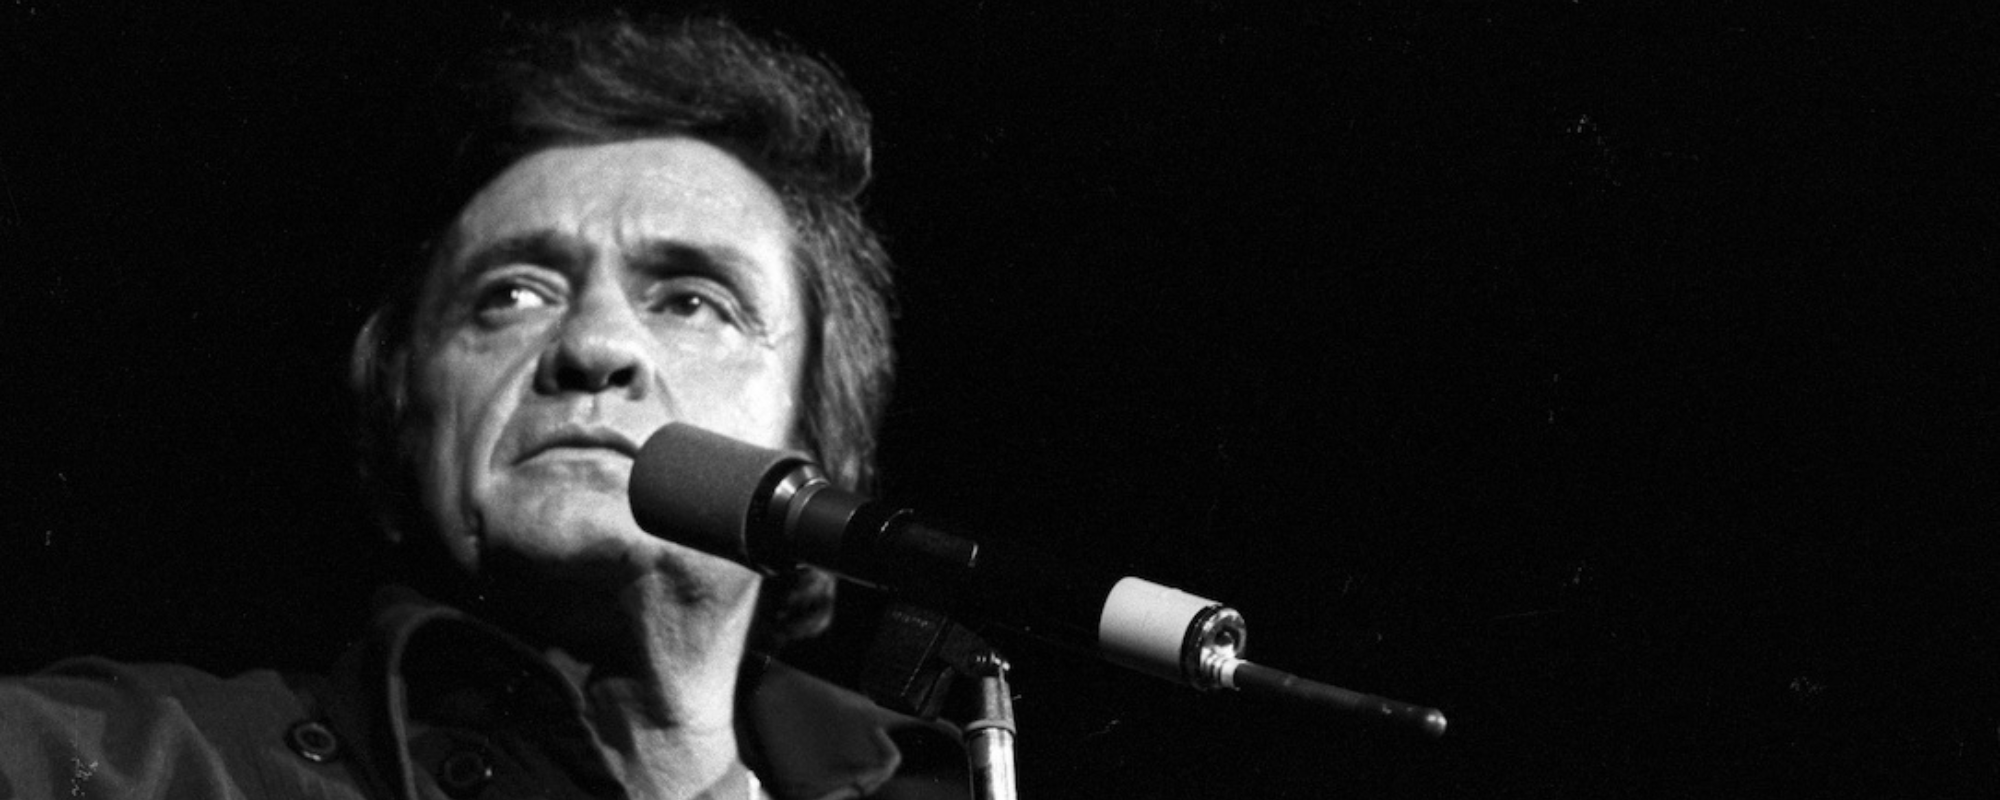 Remember When: Johnny Cash Performed on ‘Sesame Street’ and Was Called “Johnny Trash” and “Johnny Clash”